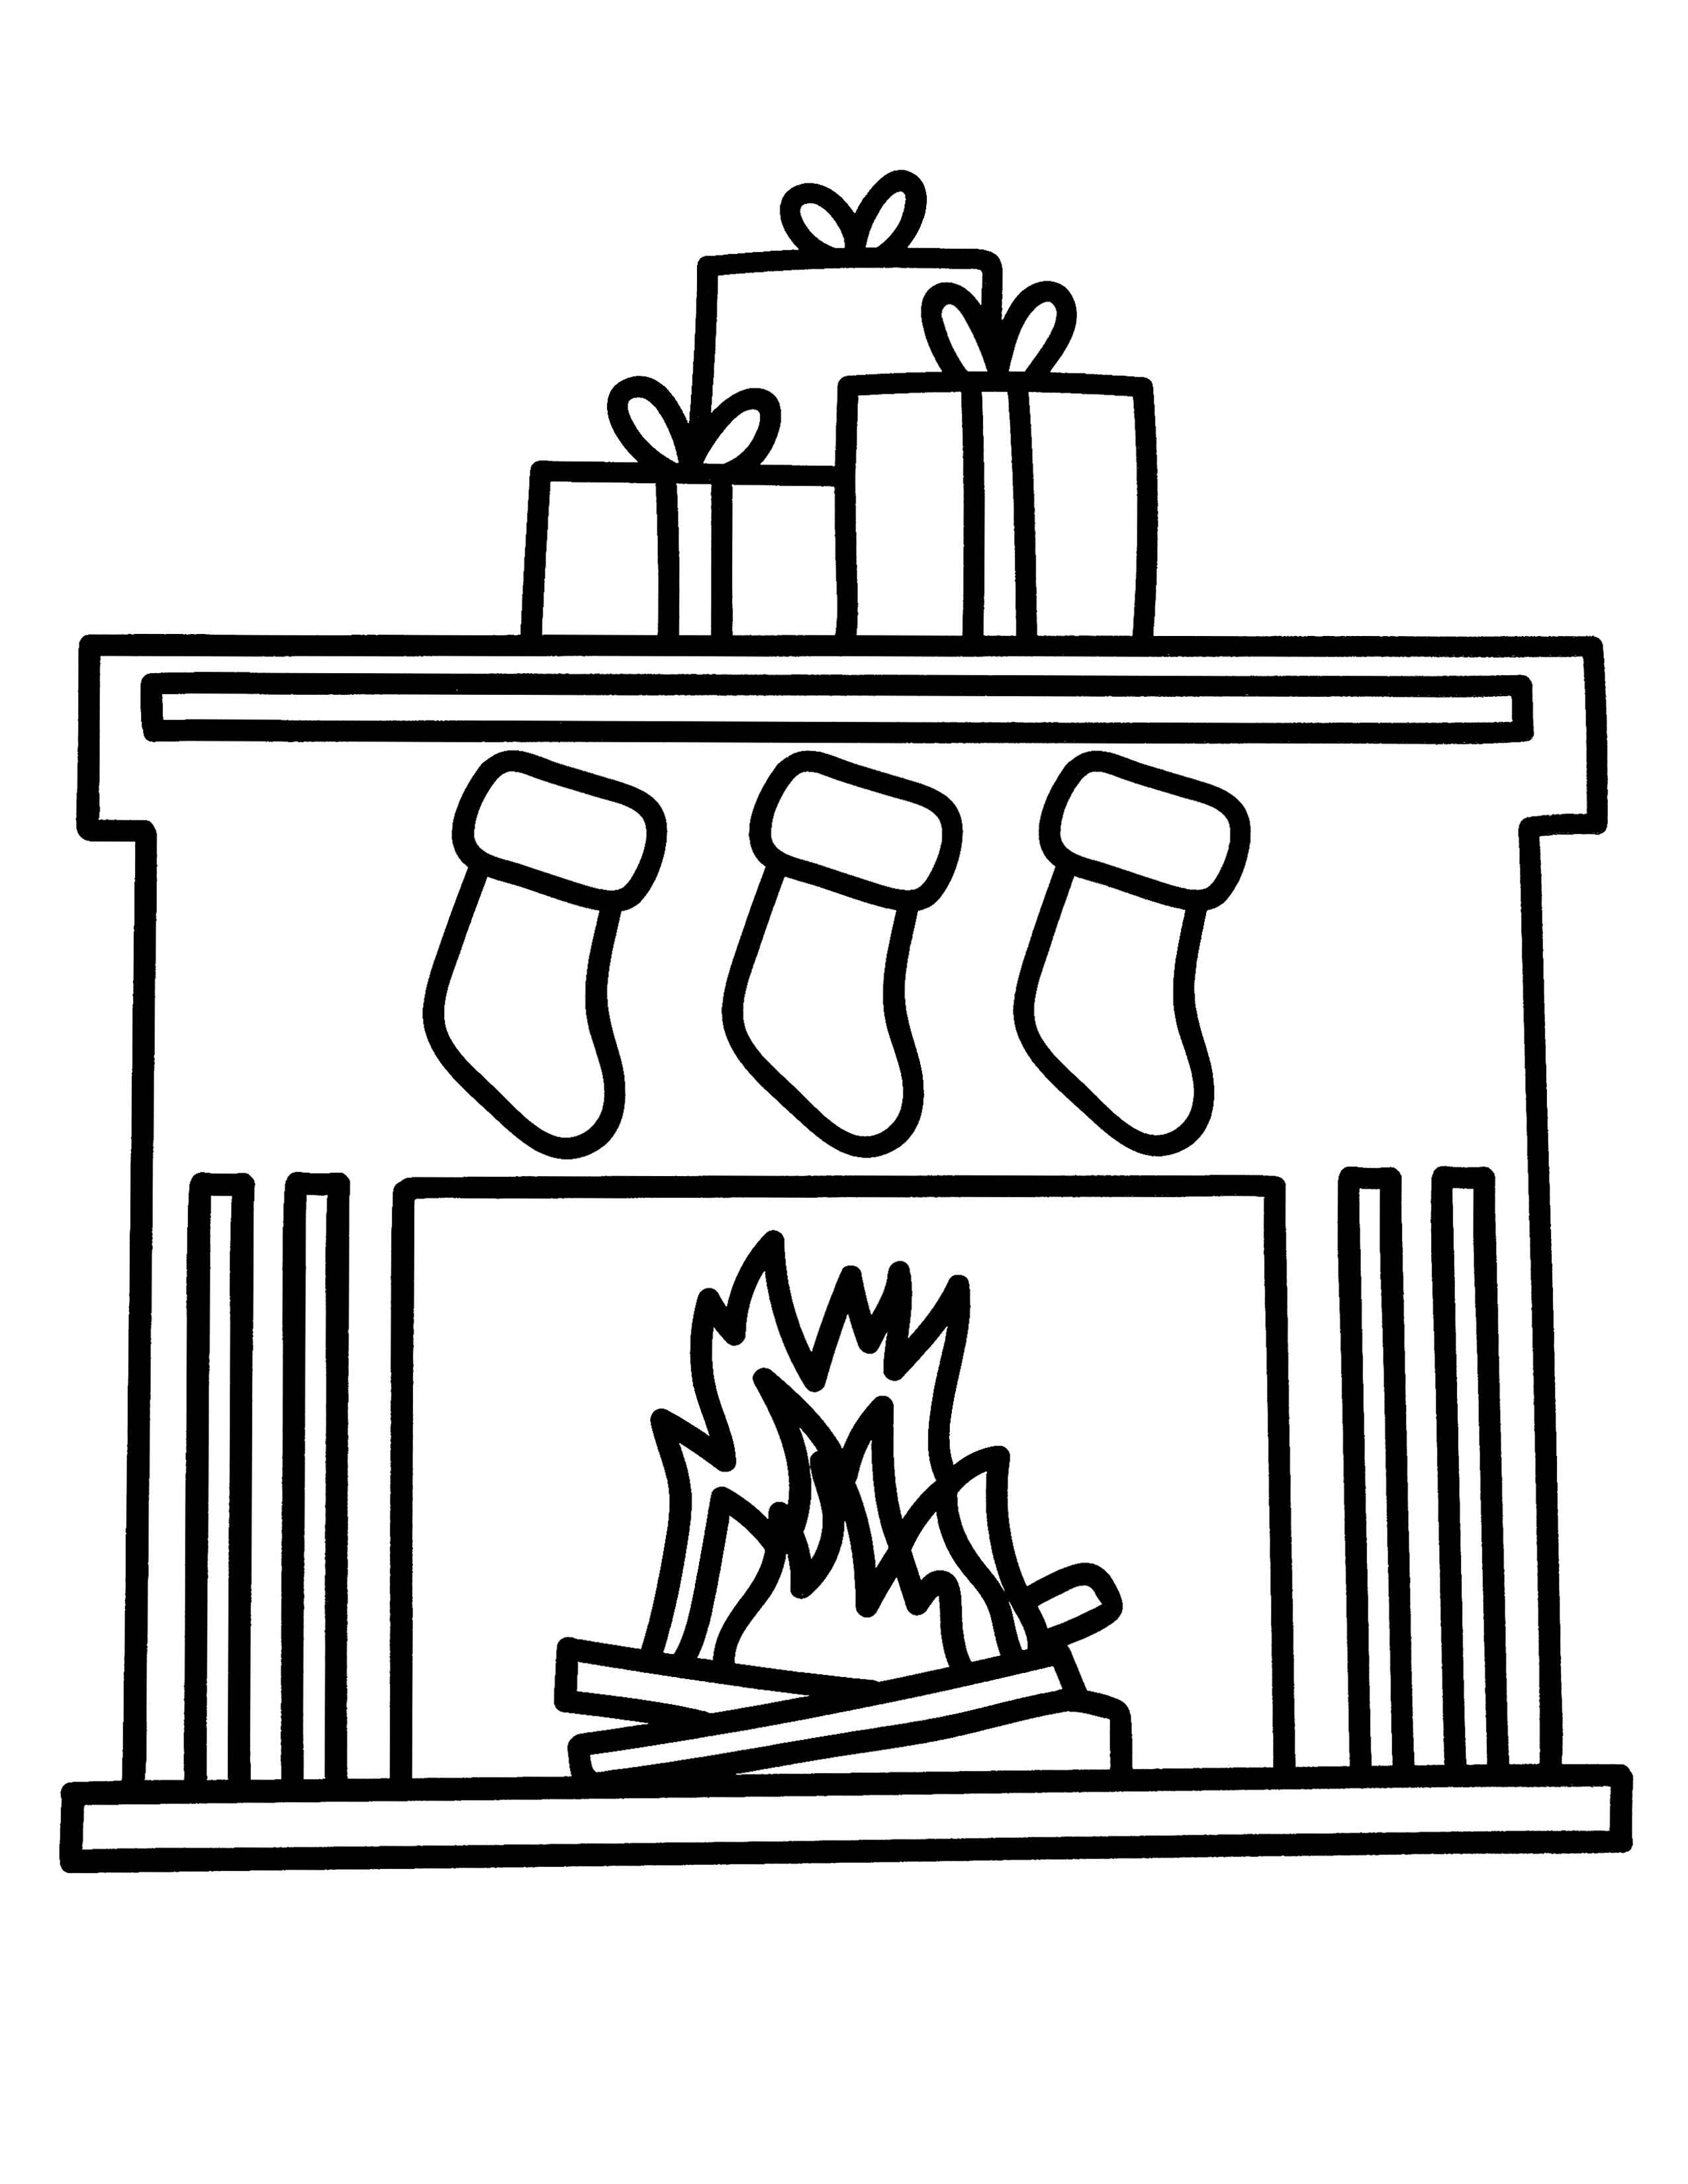 Fireplace Coloring Page – Kimmi The Clown